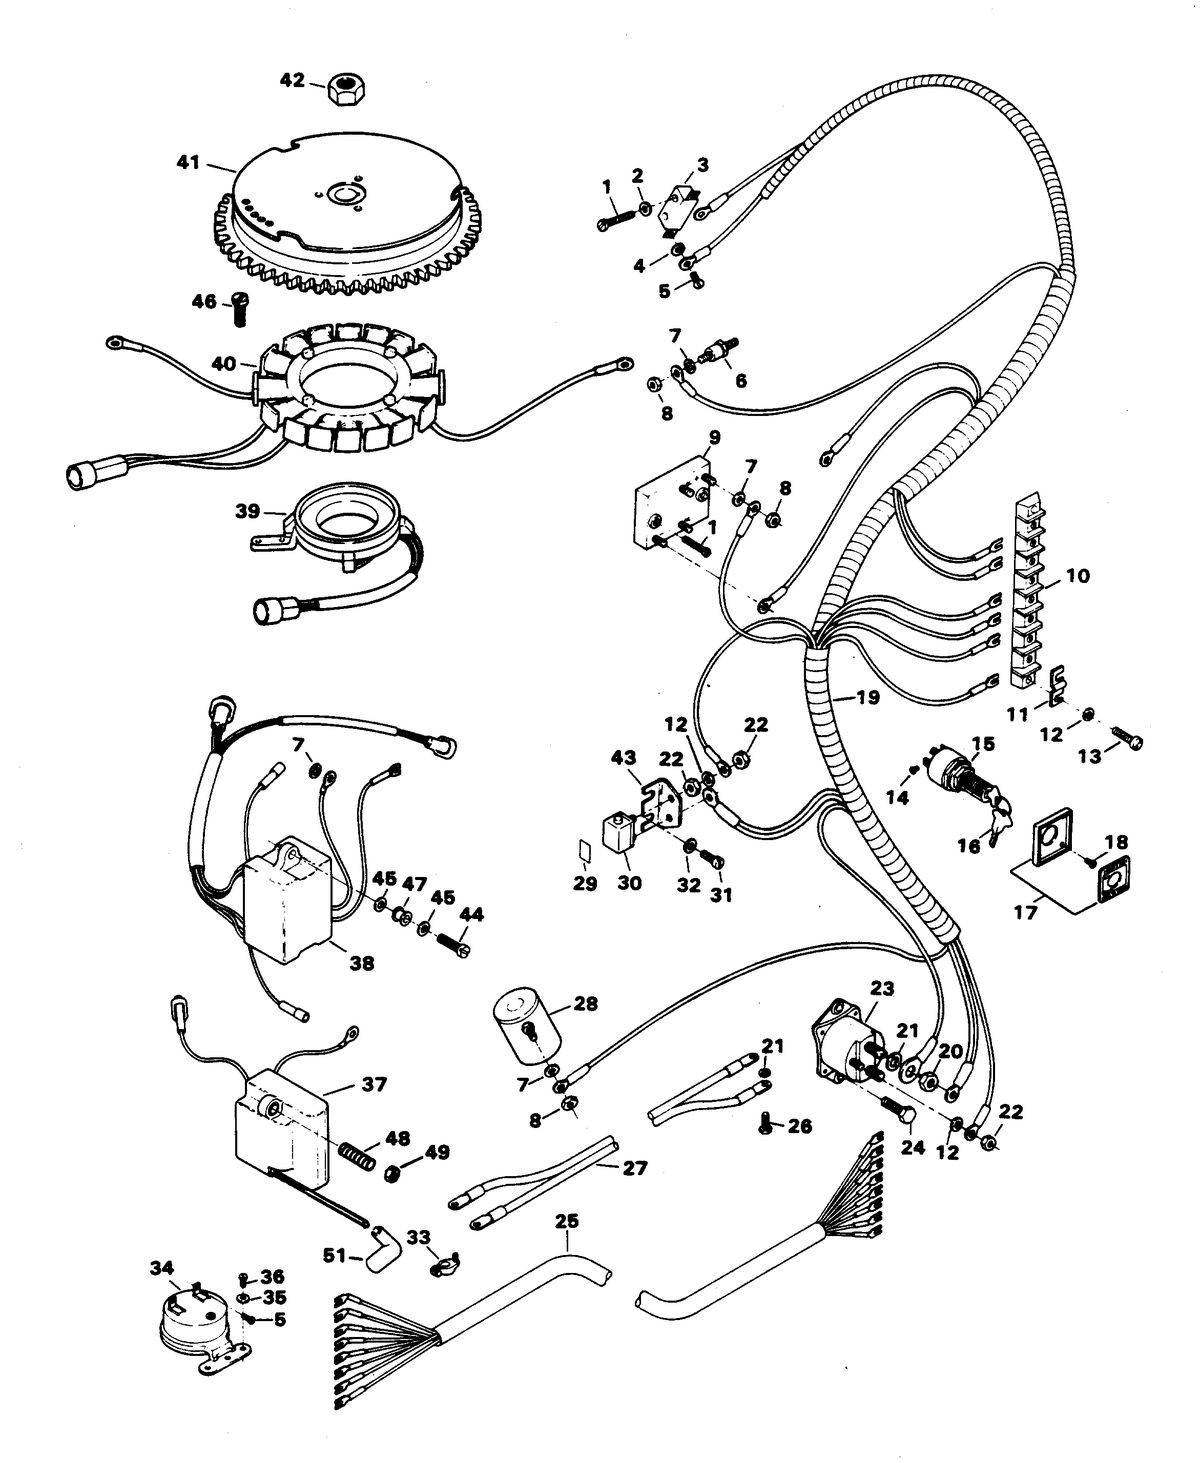 CHRYSLER 55 H.P. ELECTRICAL COMPONENTS